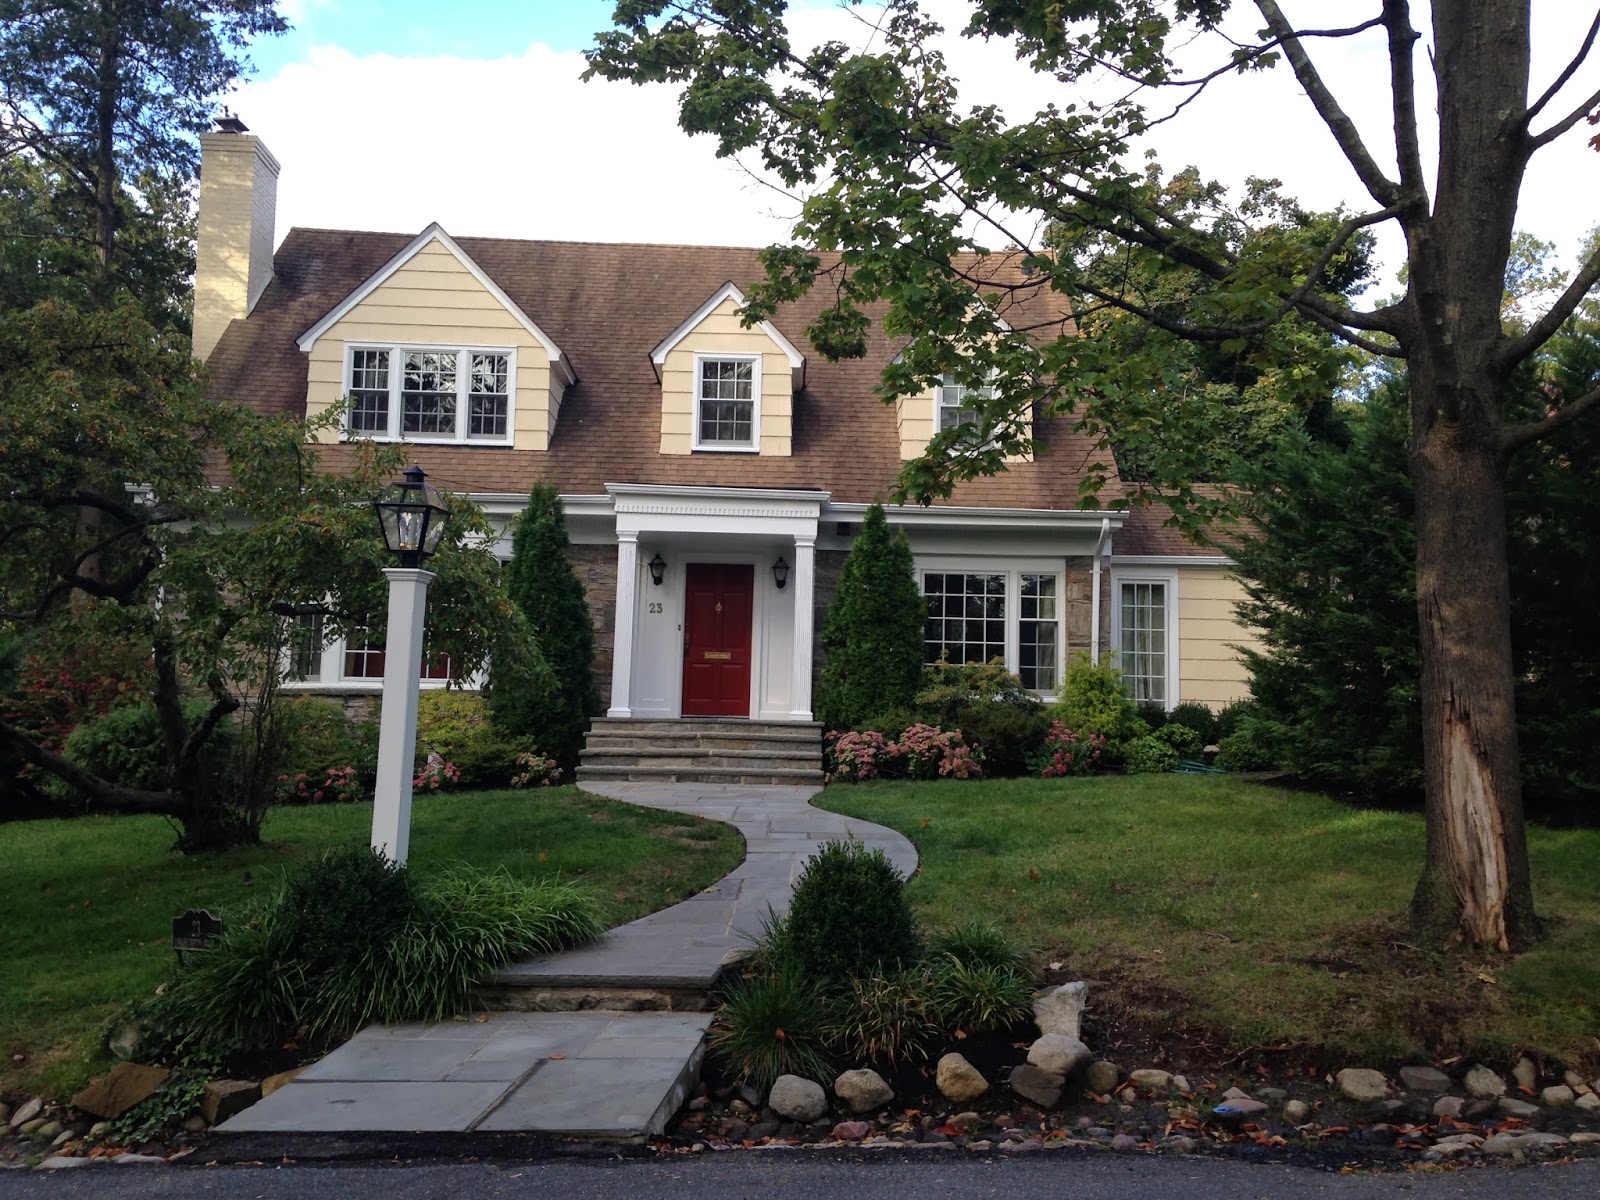 Finding a home in New Jersey. Home search in Maplewood, South Orange ...